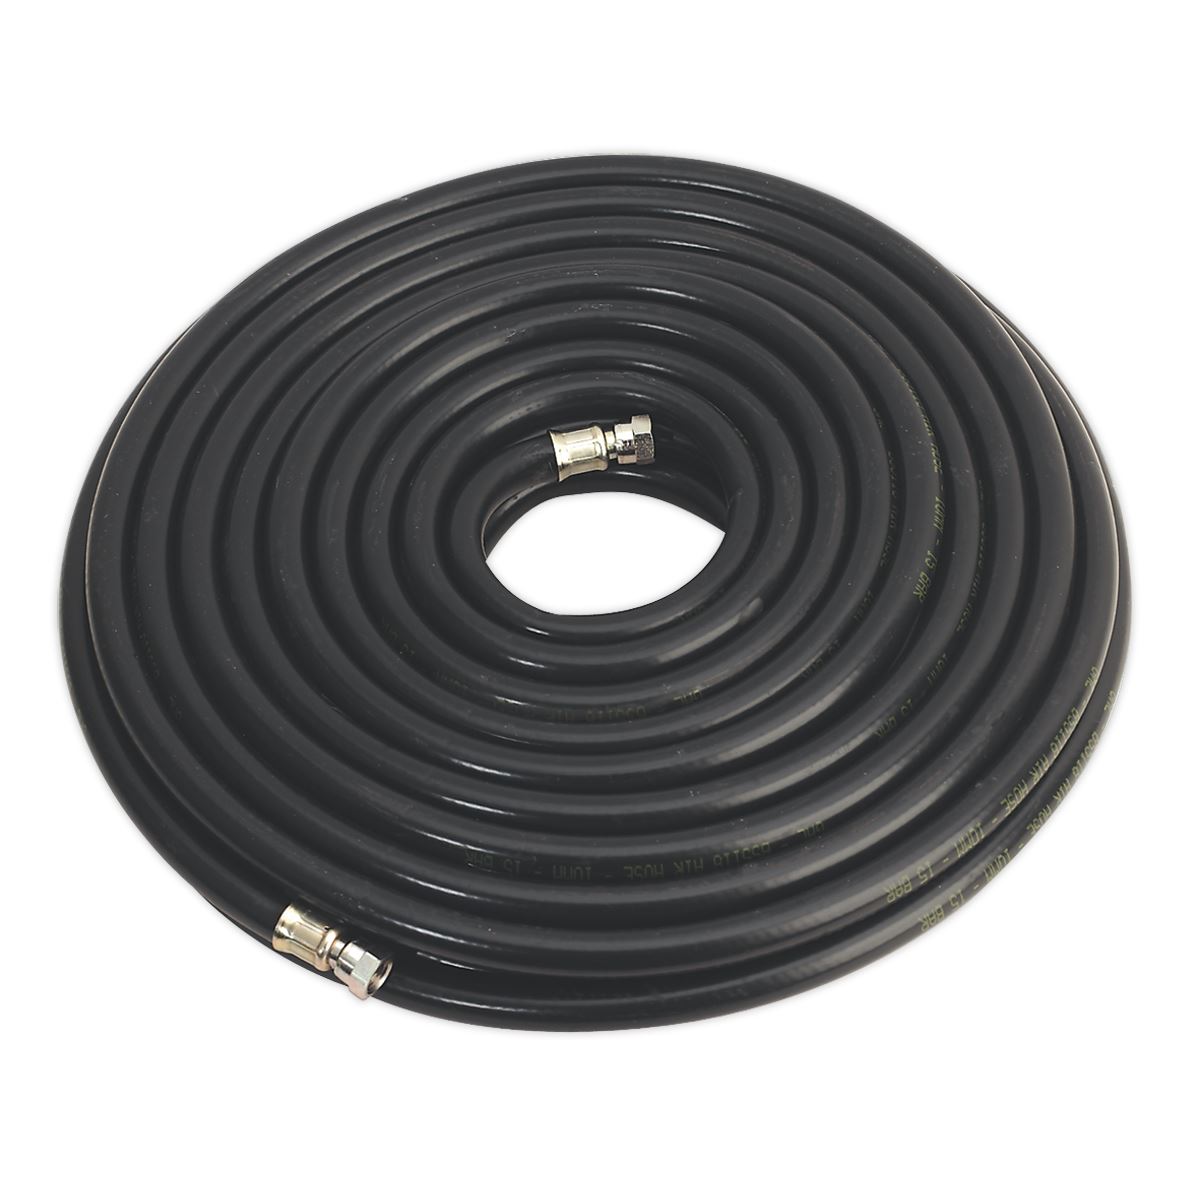 Sealey Air Hose 30m x Ø10mm with 1/4"BSP Unions Heavy-Duty